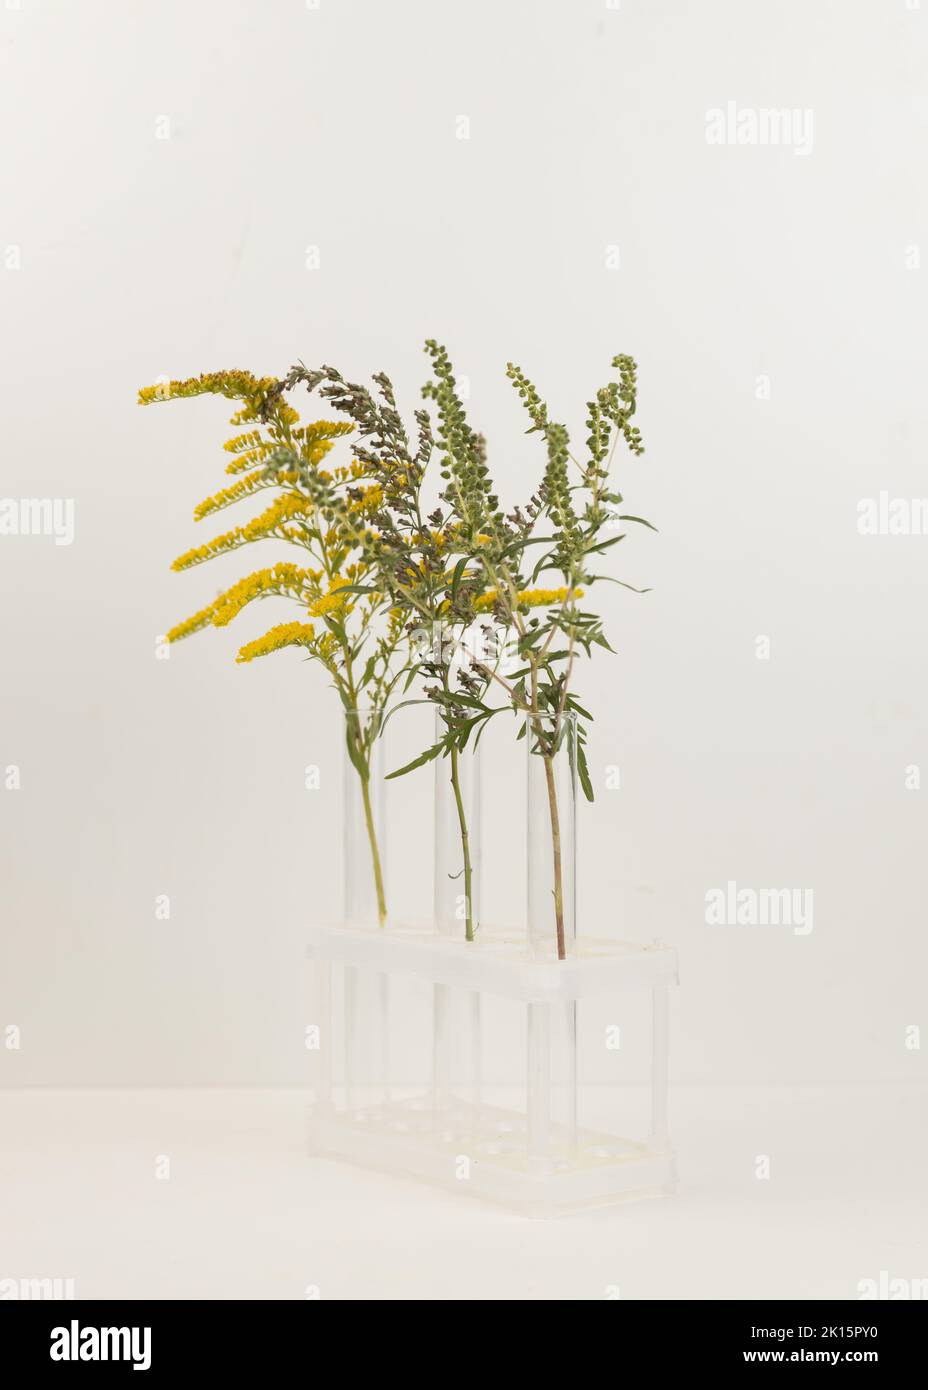 Ragweed, goldenrod and wormwood flowers in a glass vial. Blooming Ambrosia artemisiifolia is a dangerous allergenic plants, weed bushes pollen causes Stock Photo